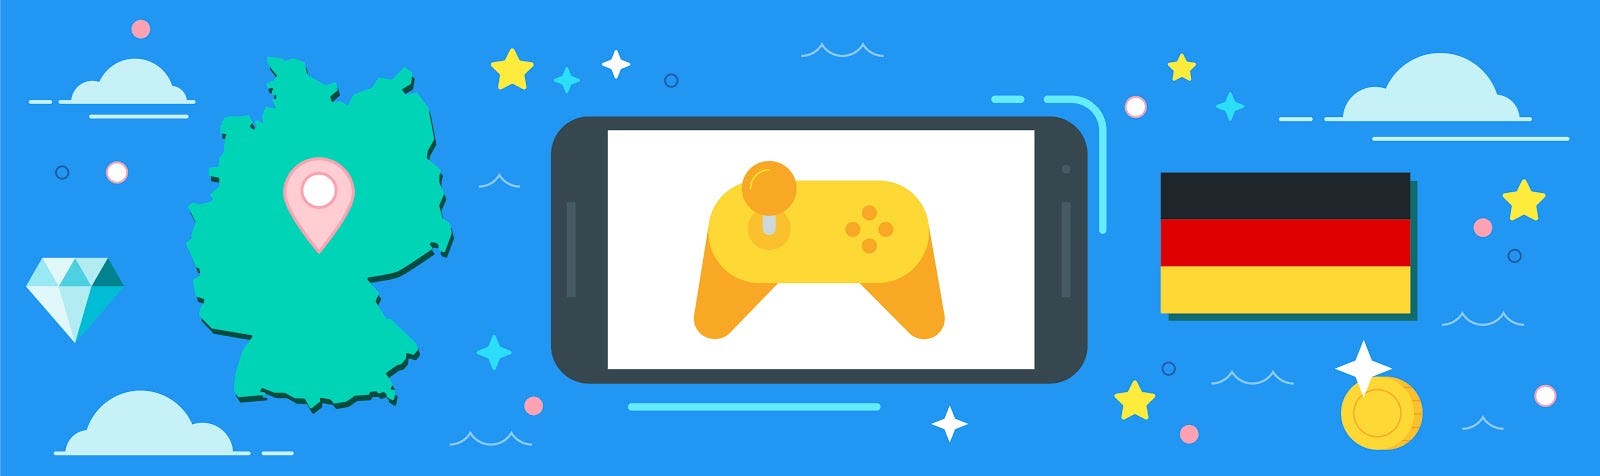 FIVE - Esports Manager Game - Apps on Google Play